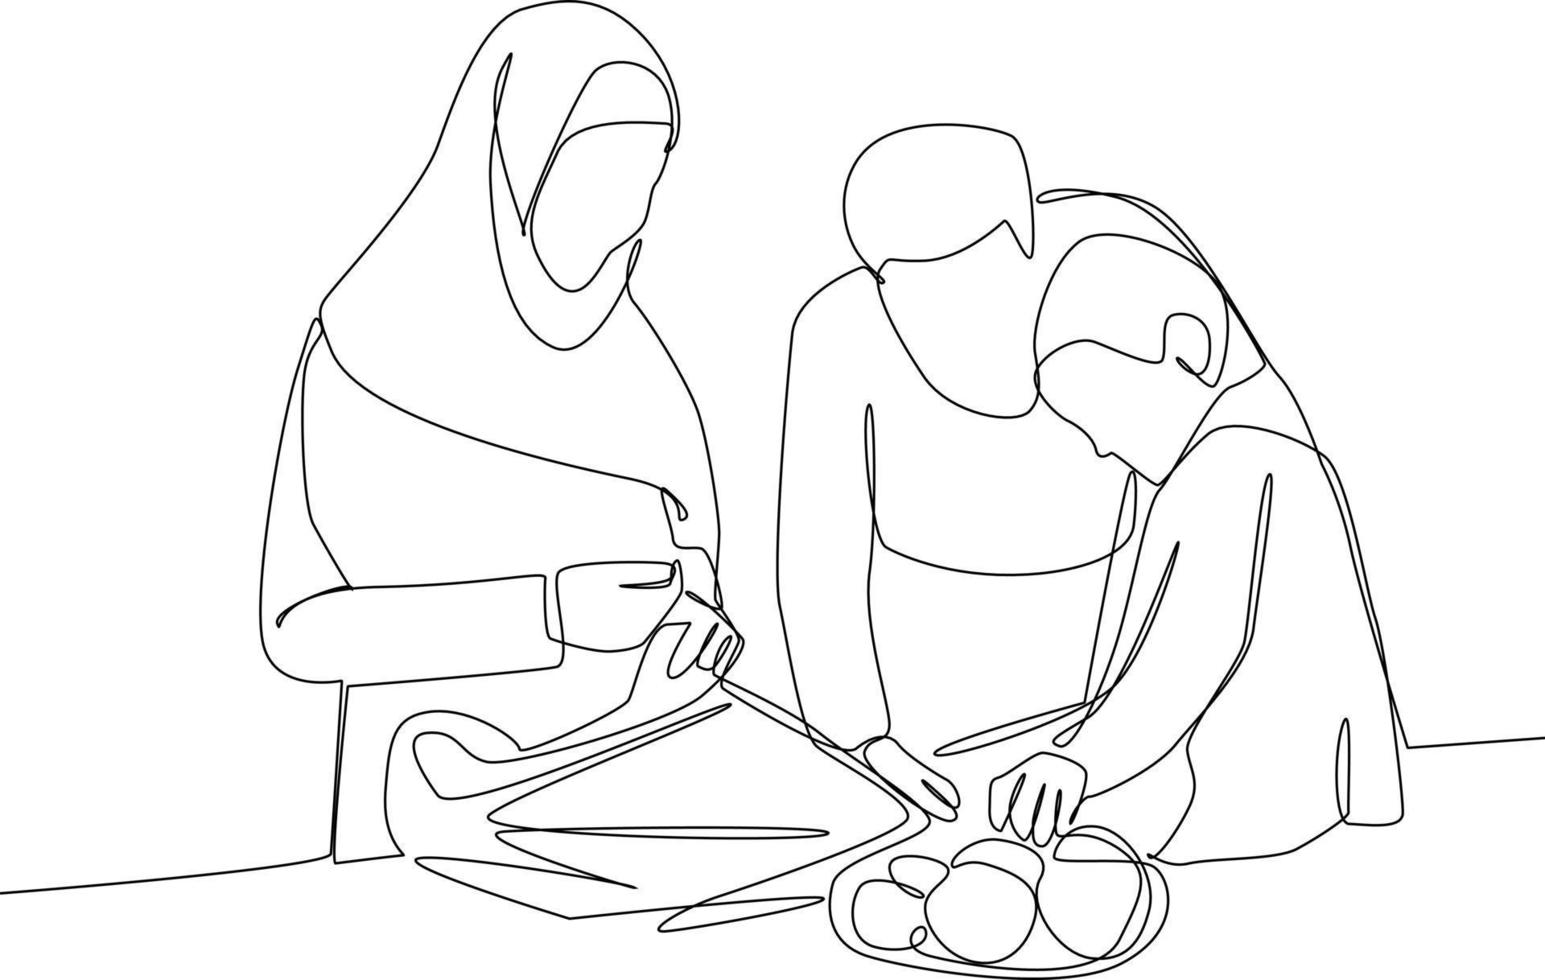 Continuous one line drawing Muslim women are gathering with family. Concept of home health care activities. Single line draw design vector graphic illustration.